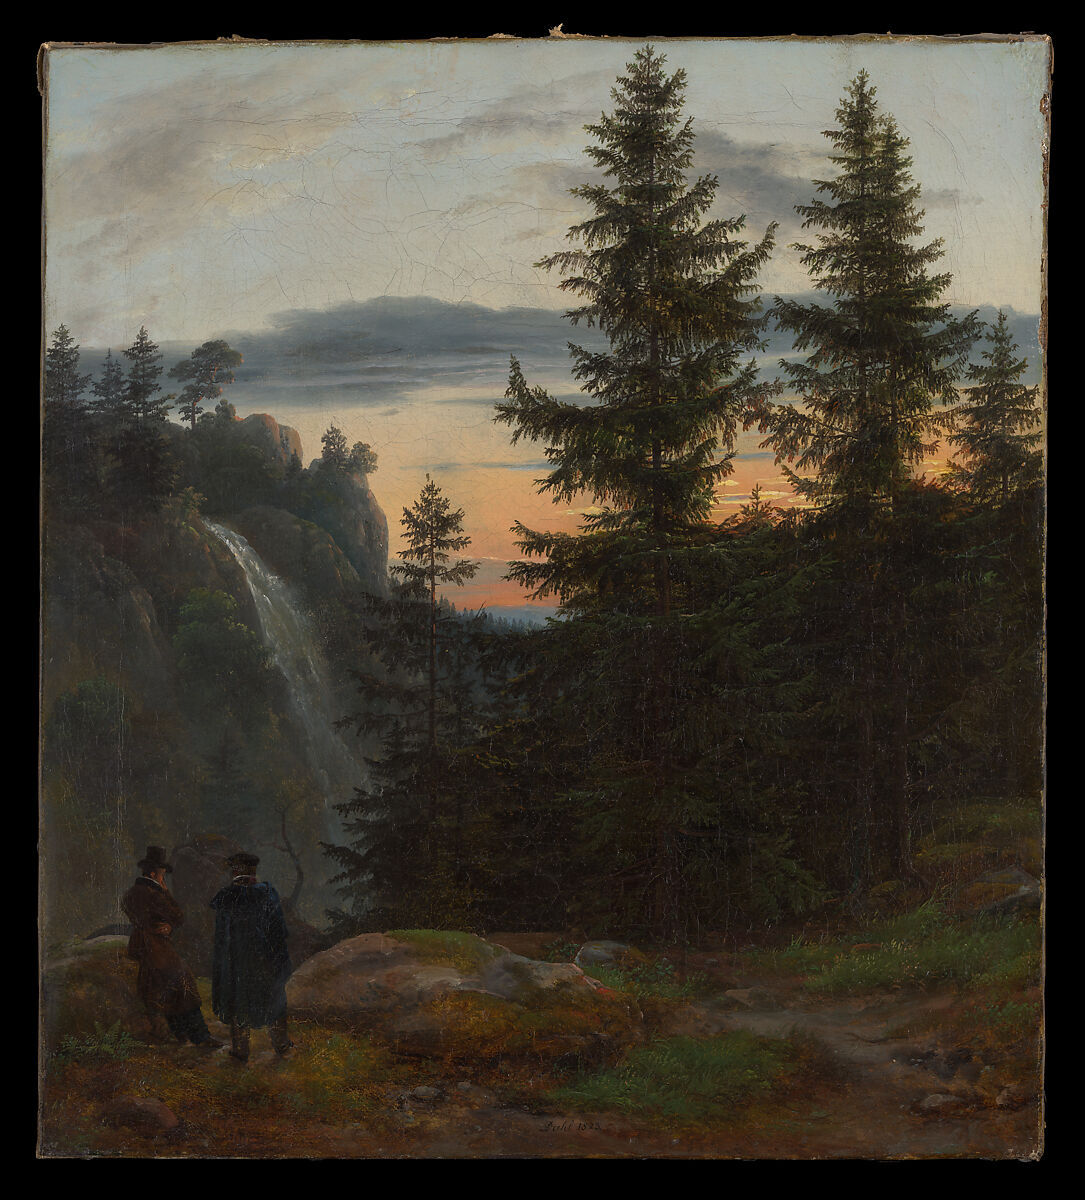 Two Men before a Waterfall at Sunset, Johan Christian Dahl  Norwegian, Oil on canvas